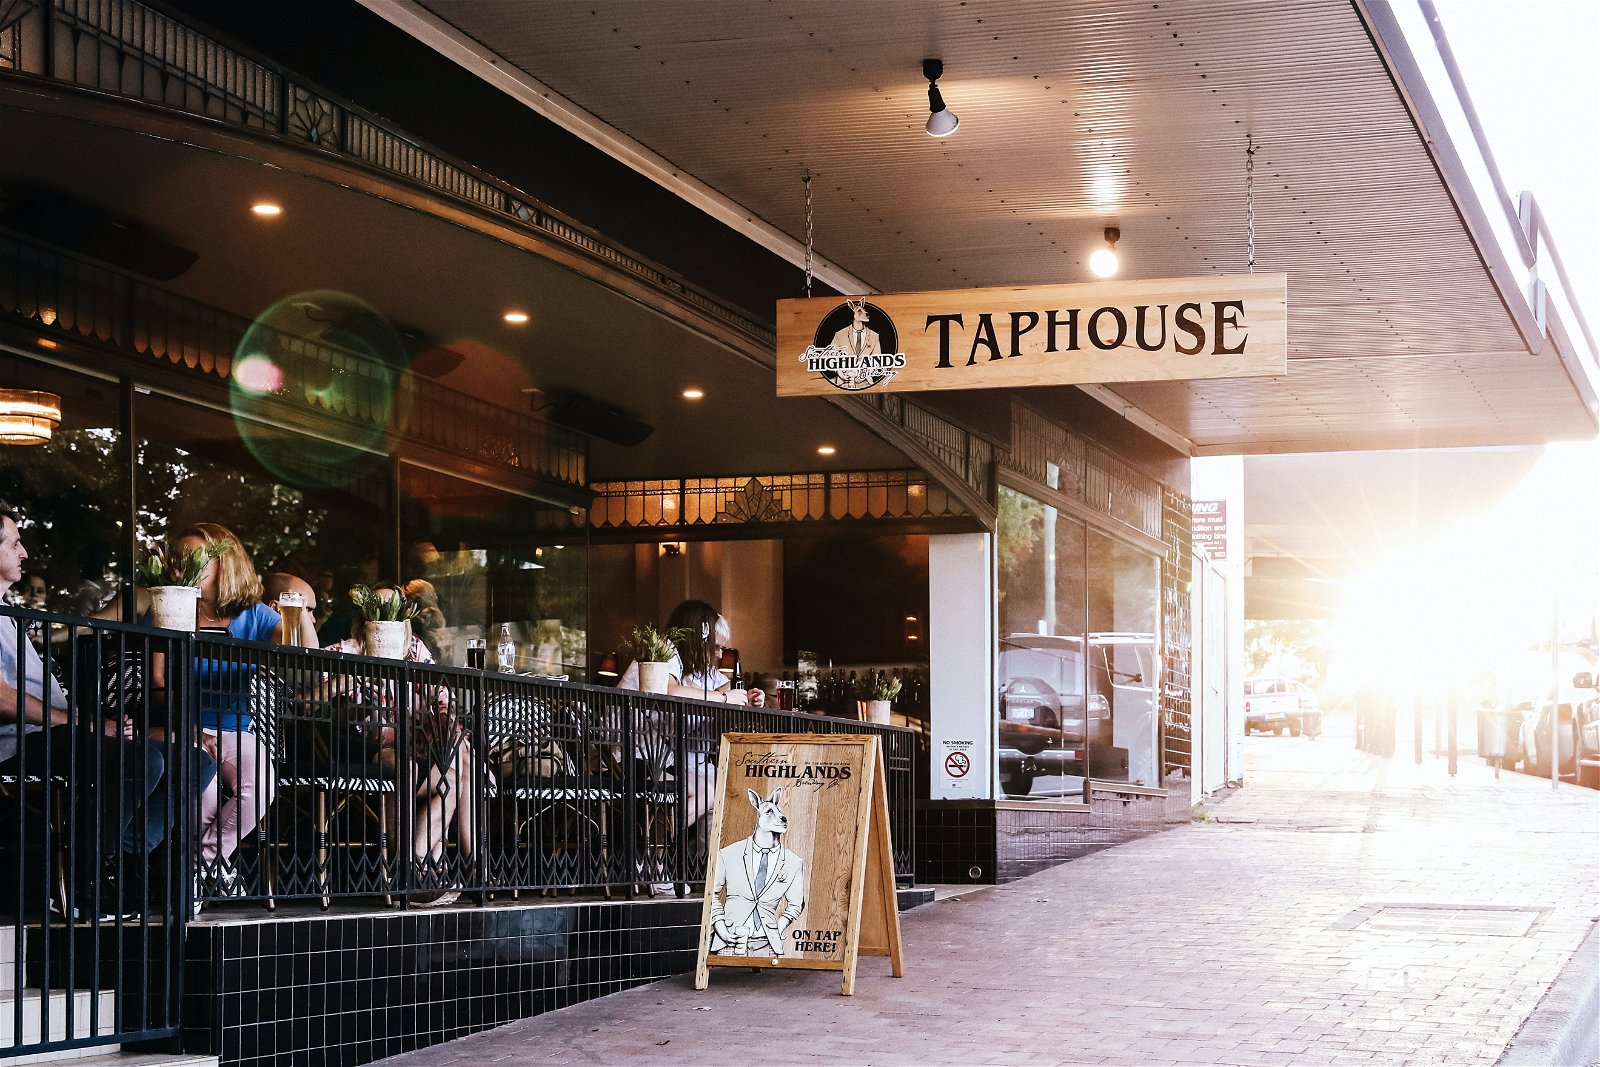 Southern Highlands Brewing Co. Taphouse